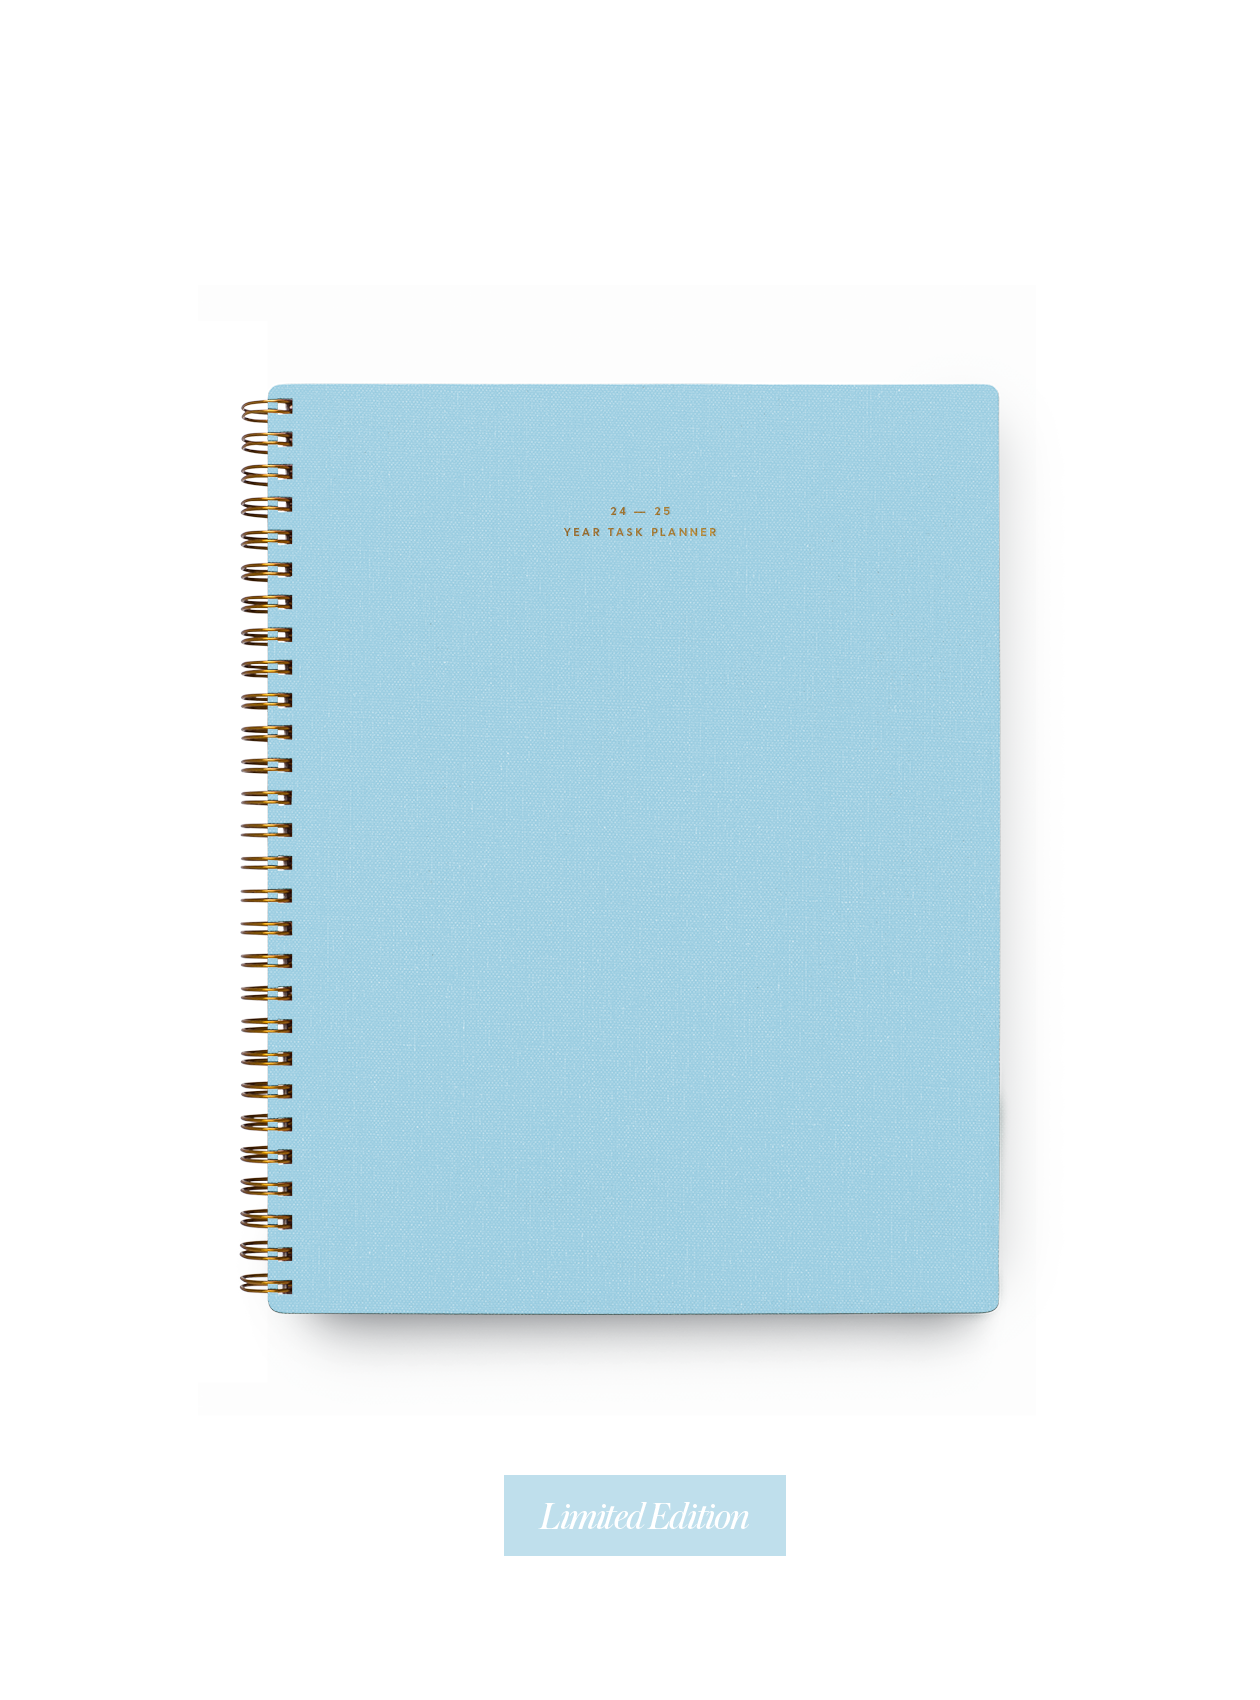 Appointed Year Task Planner with brass wire-o binding, foil stamped details, and durable water-resistant bookcloth || Sky Blue